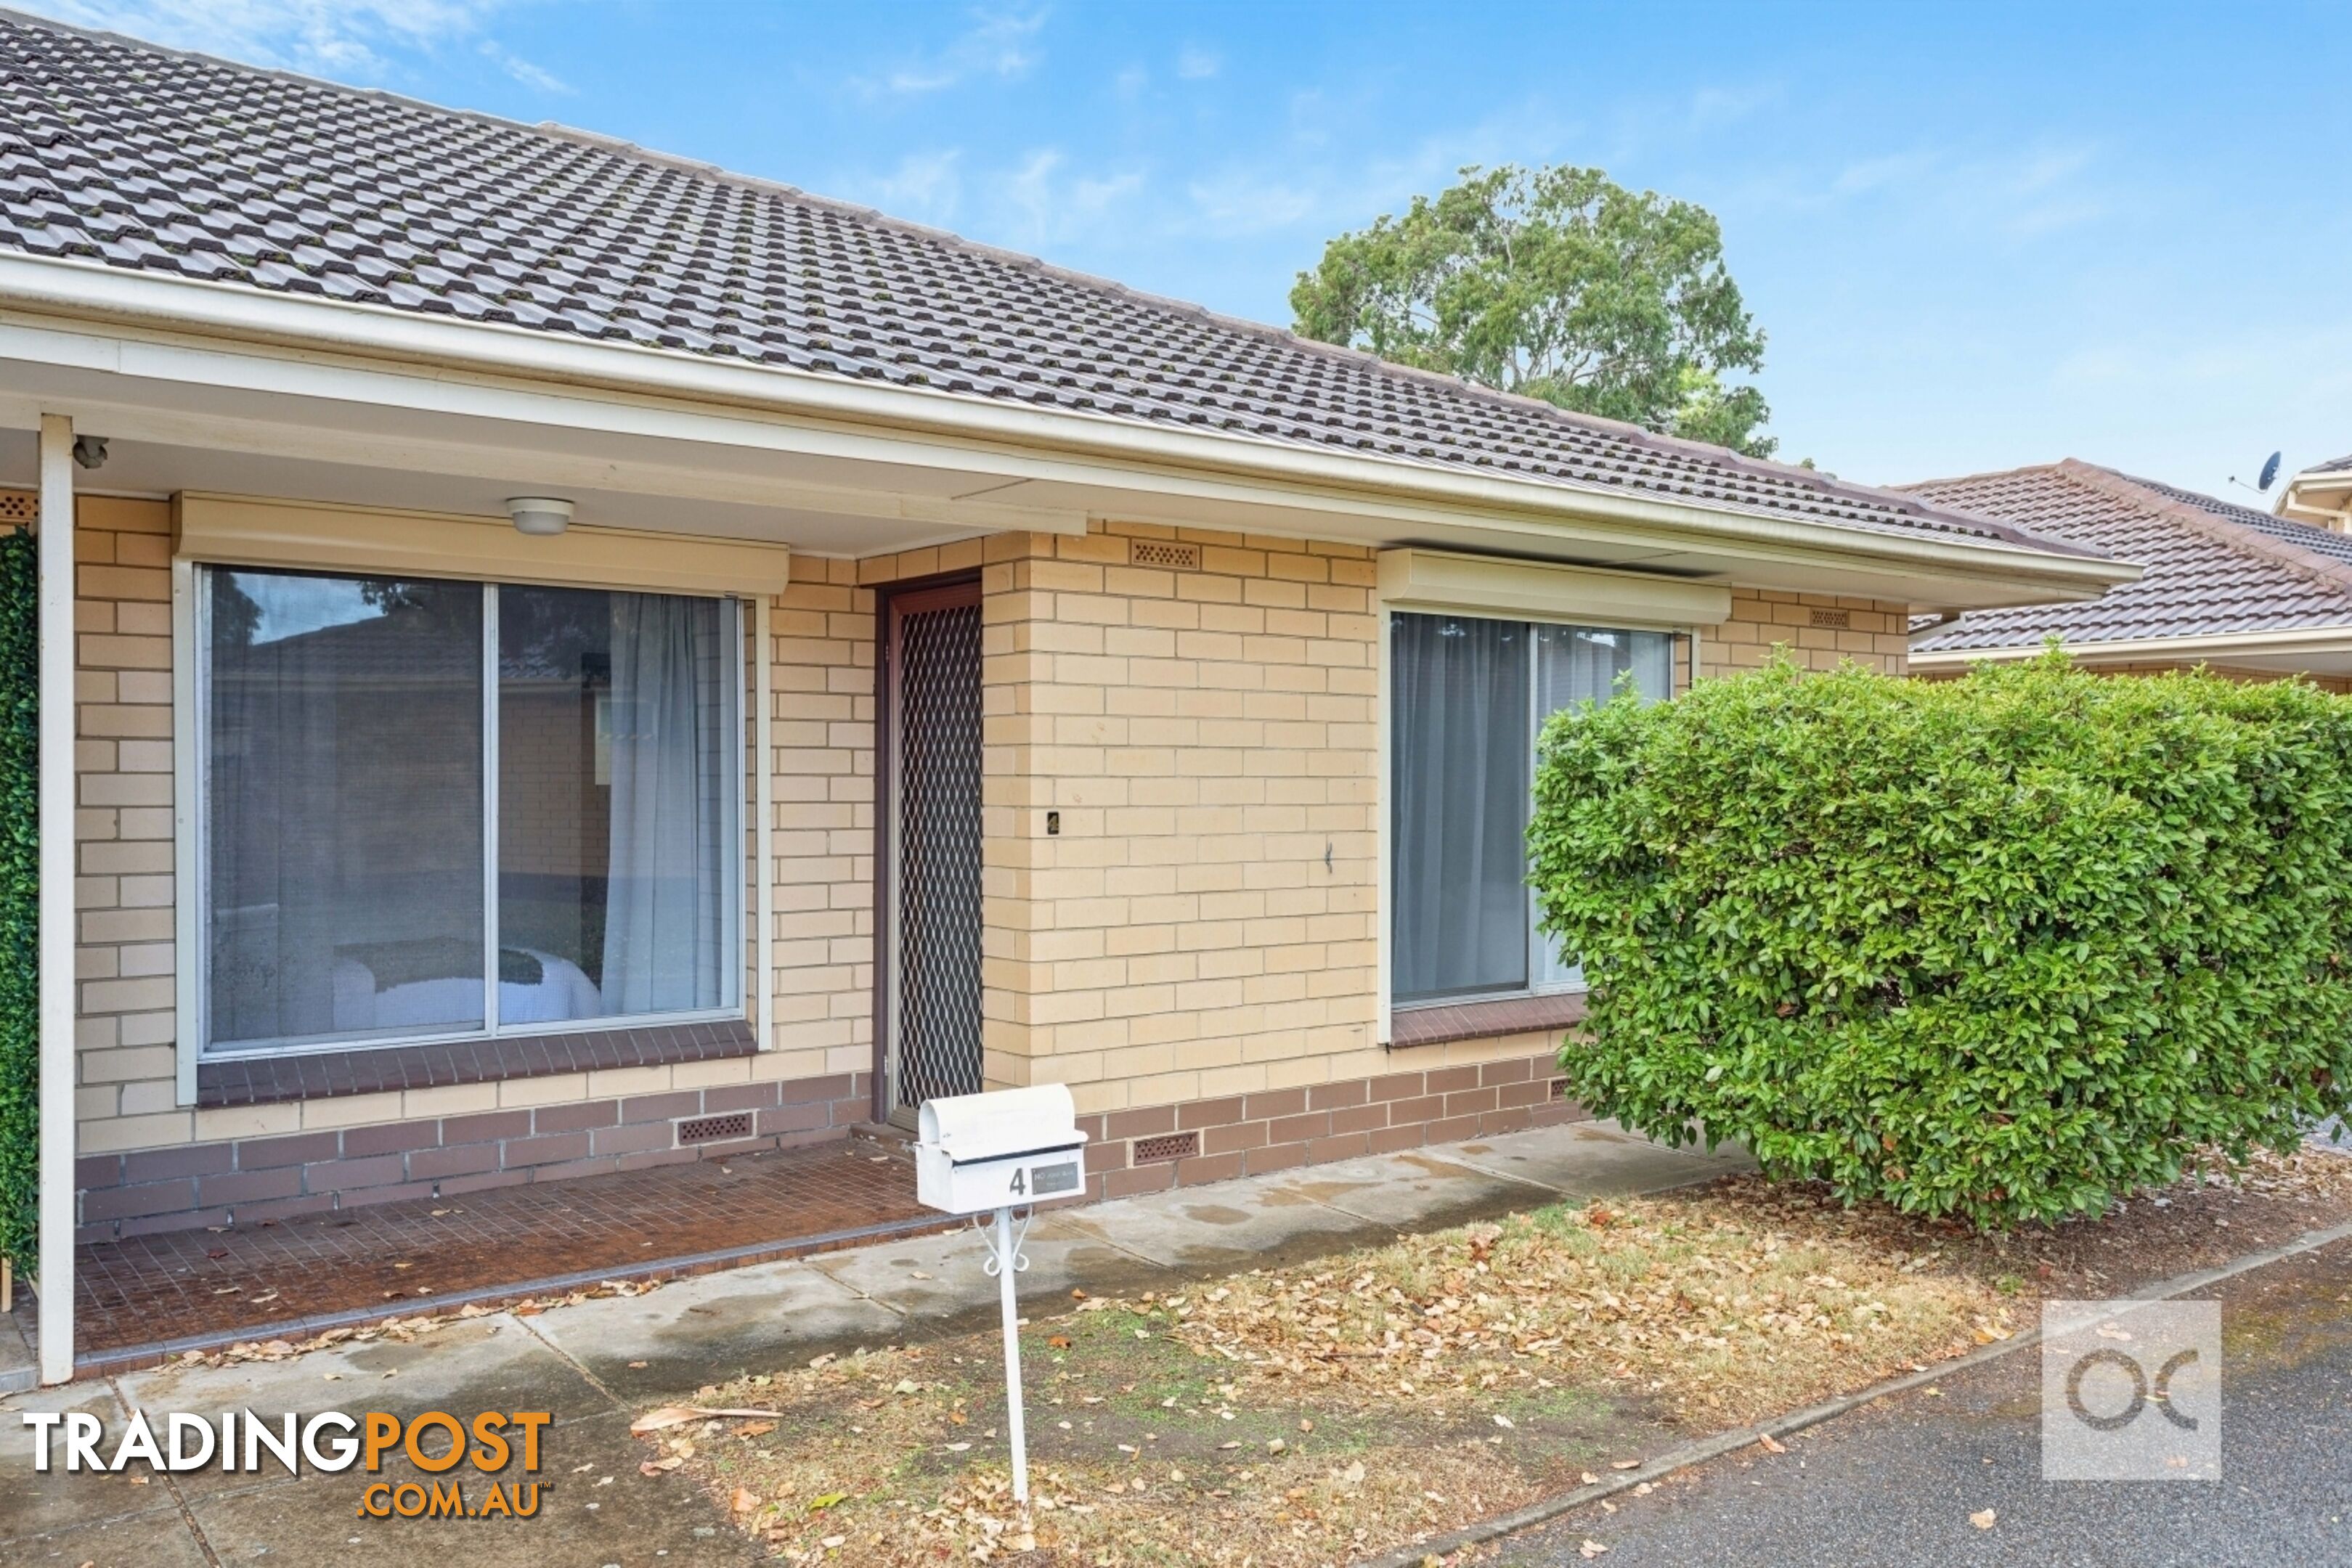 4/7-11 Findon Road Woodville South SA 5011